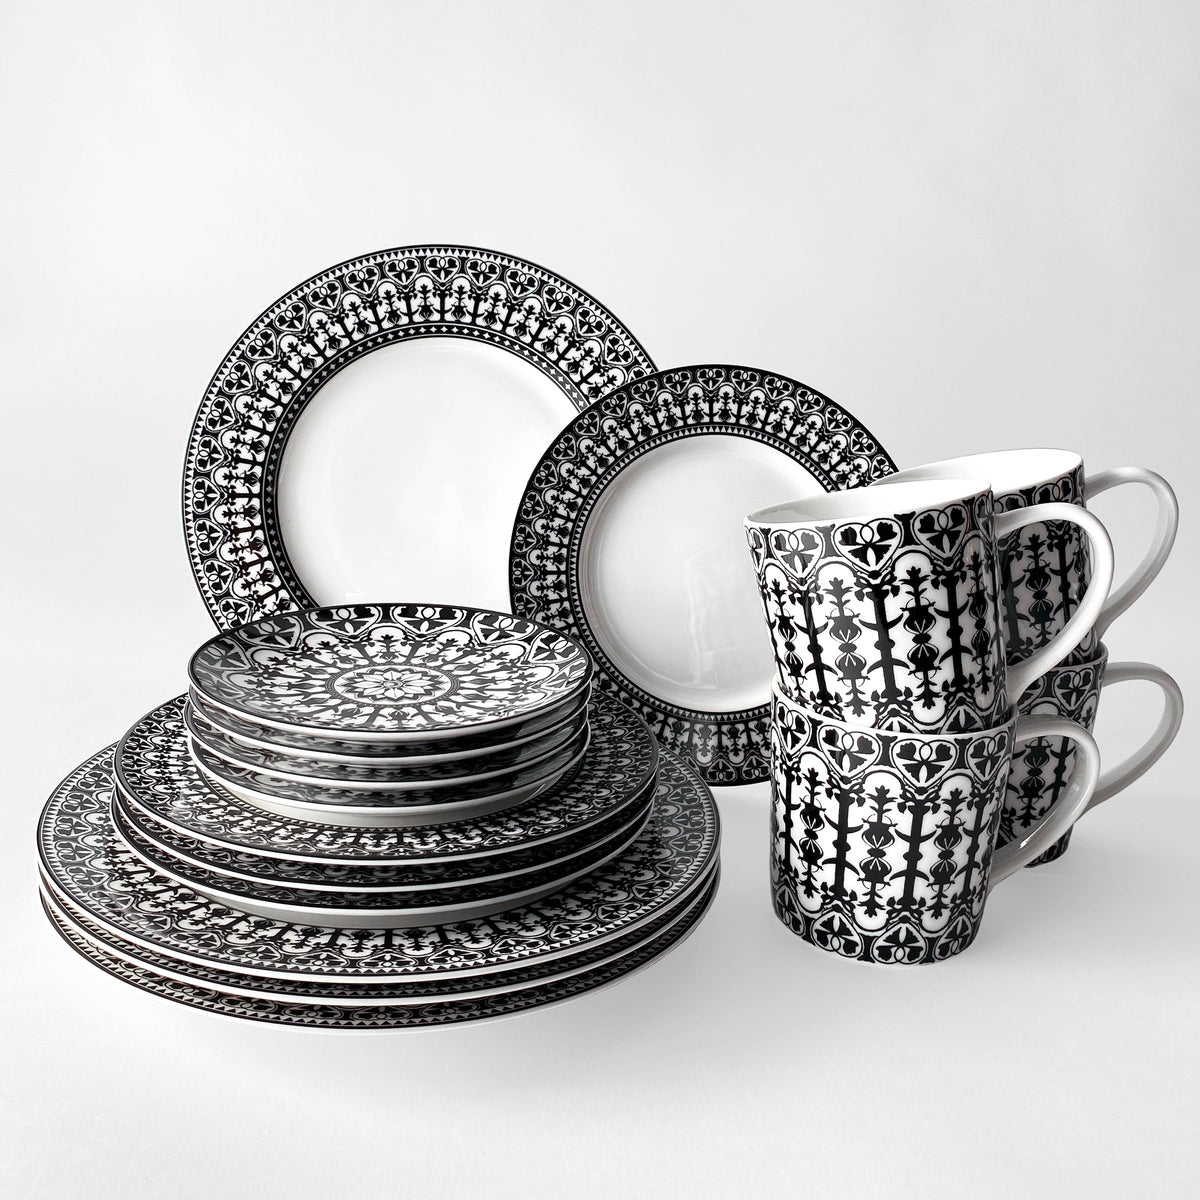 A black and white porcelain dinnerware set featuring intricate patterns covers two dinner plates, two dessert plates, Casablanca Small Plates by Caskata Artisanal Home, two cereal bowls, and two mugs. This heirloom-quality dinnerware adds a touch of elegance to any table setting.